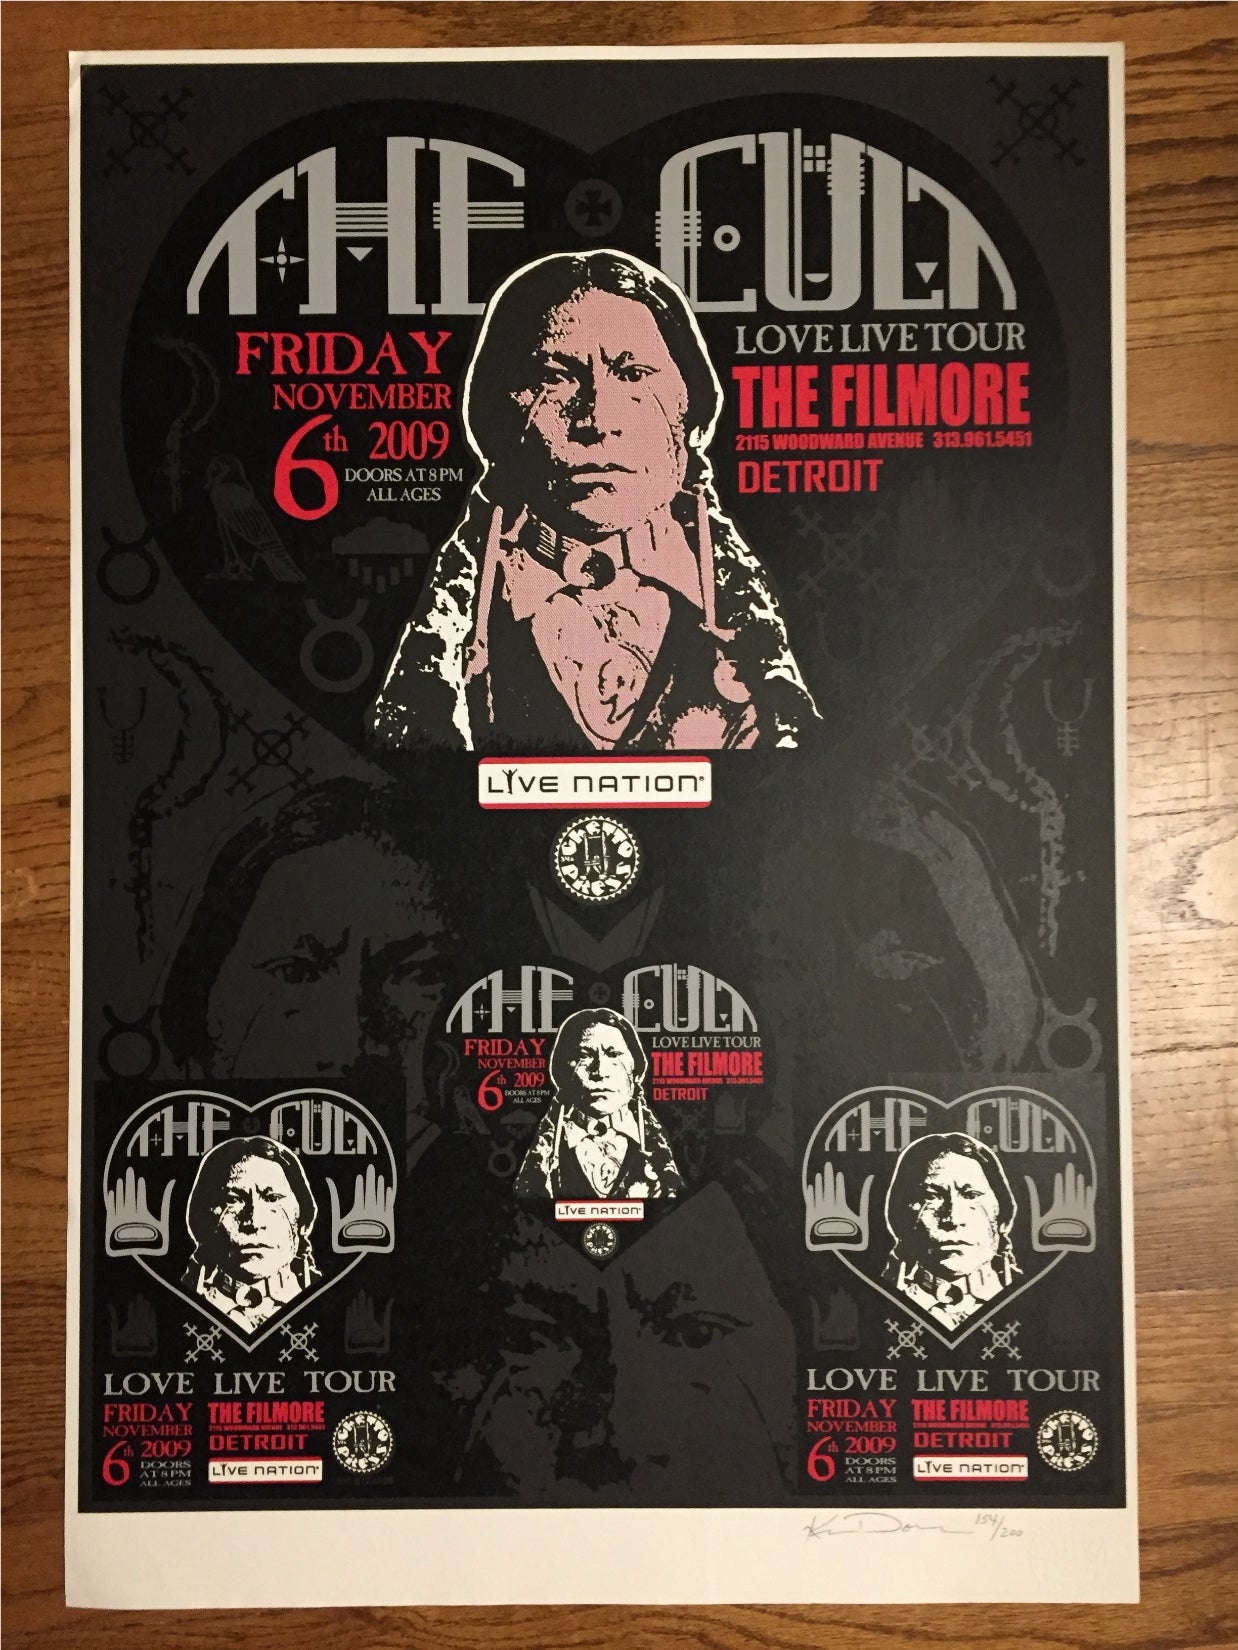 THE CULT DETROIT POSTER